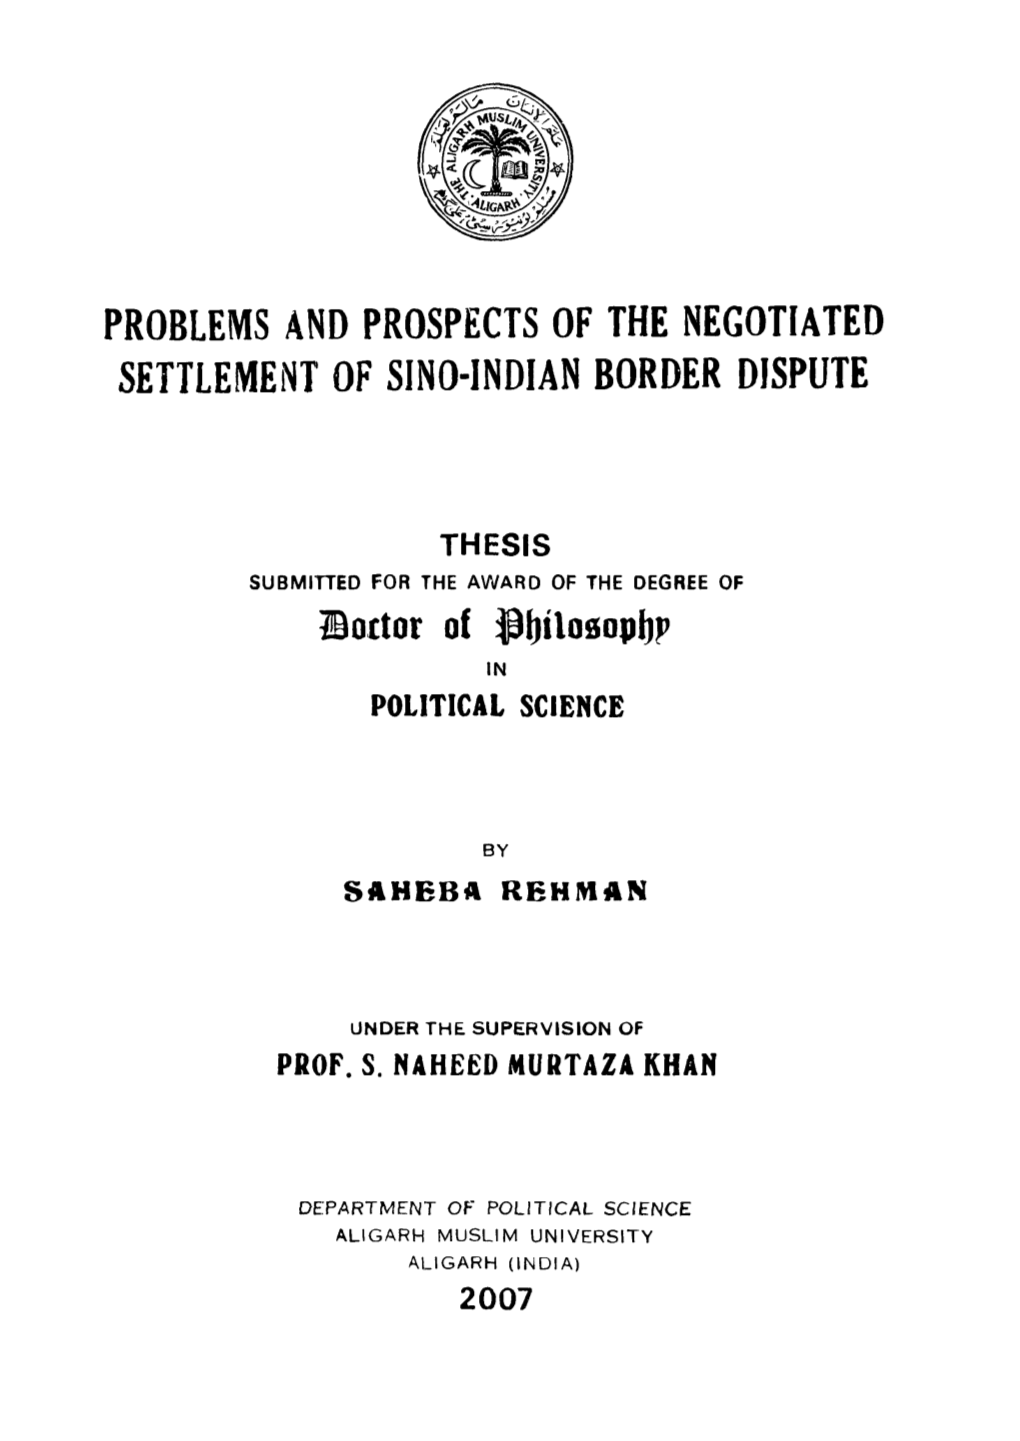 Problems and Prospects of the Negotiated Settlement of Sino-Indian Border Dispute